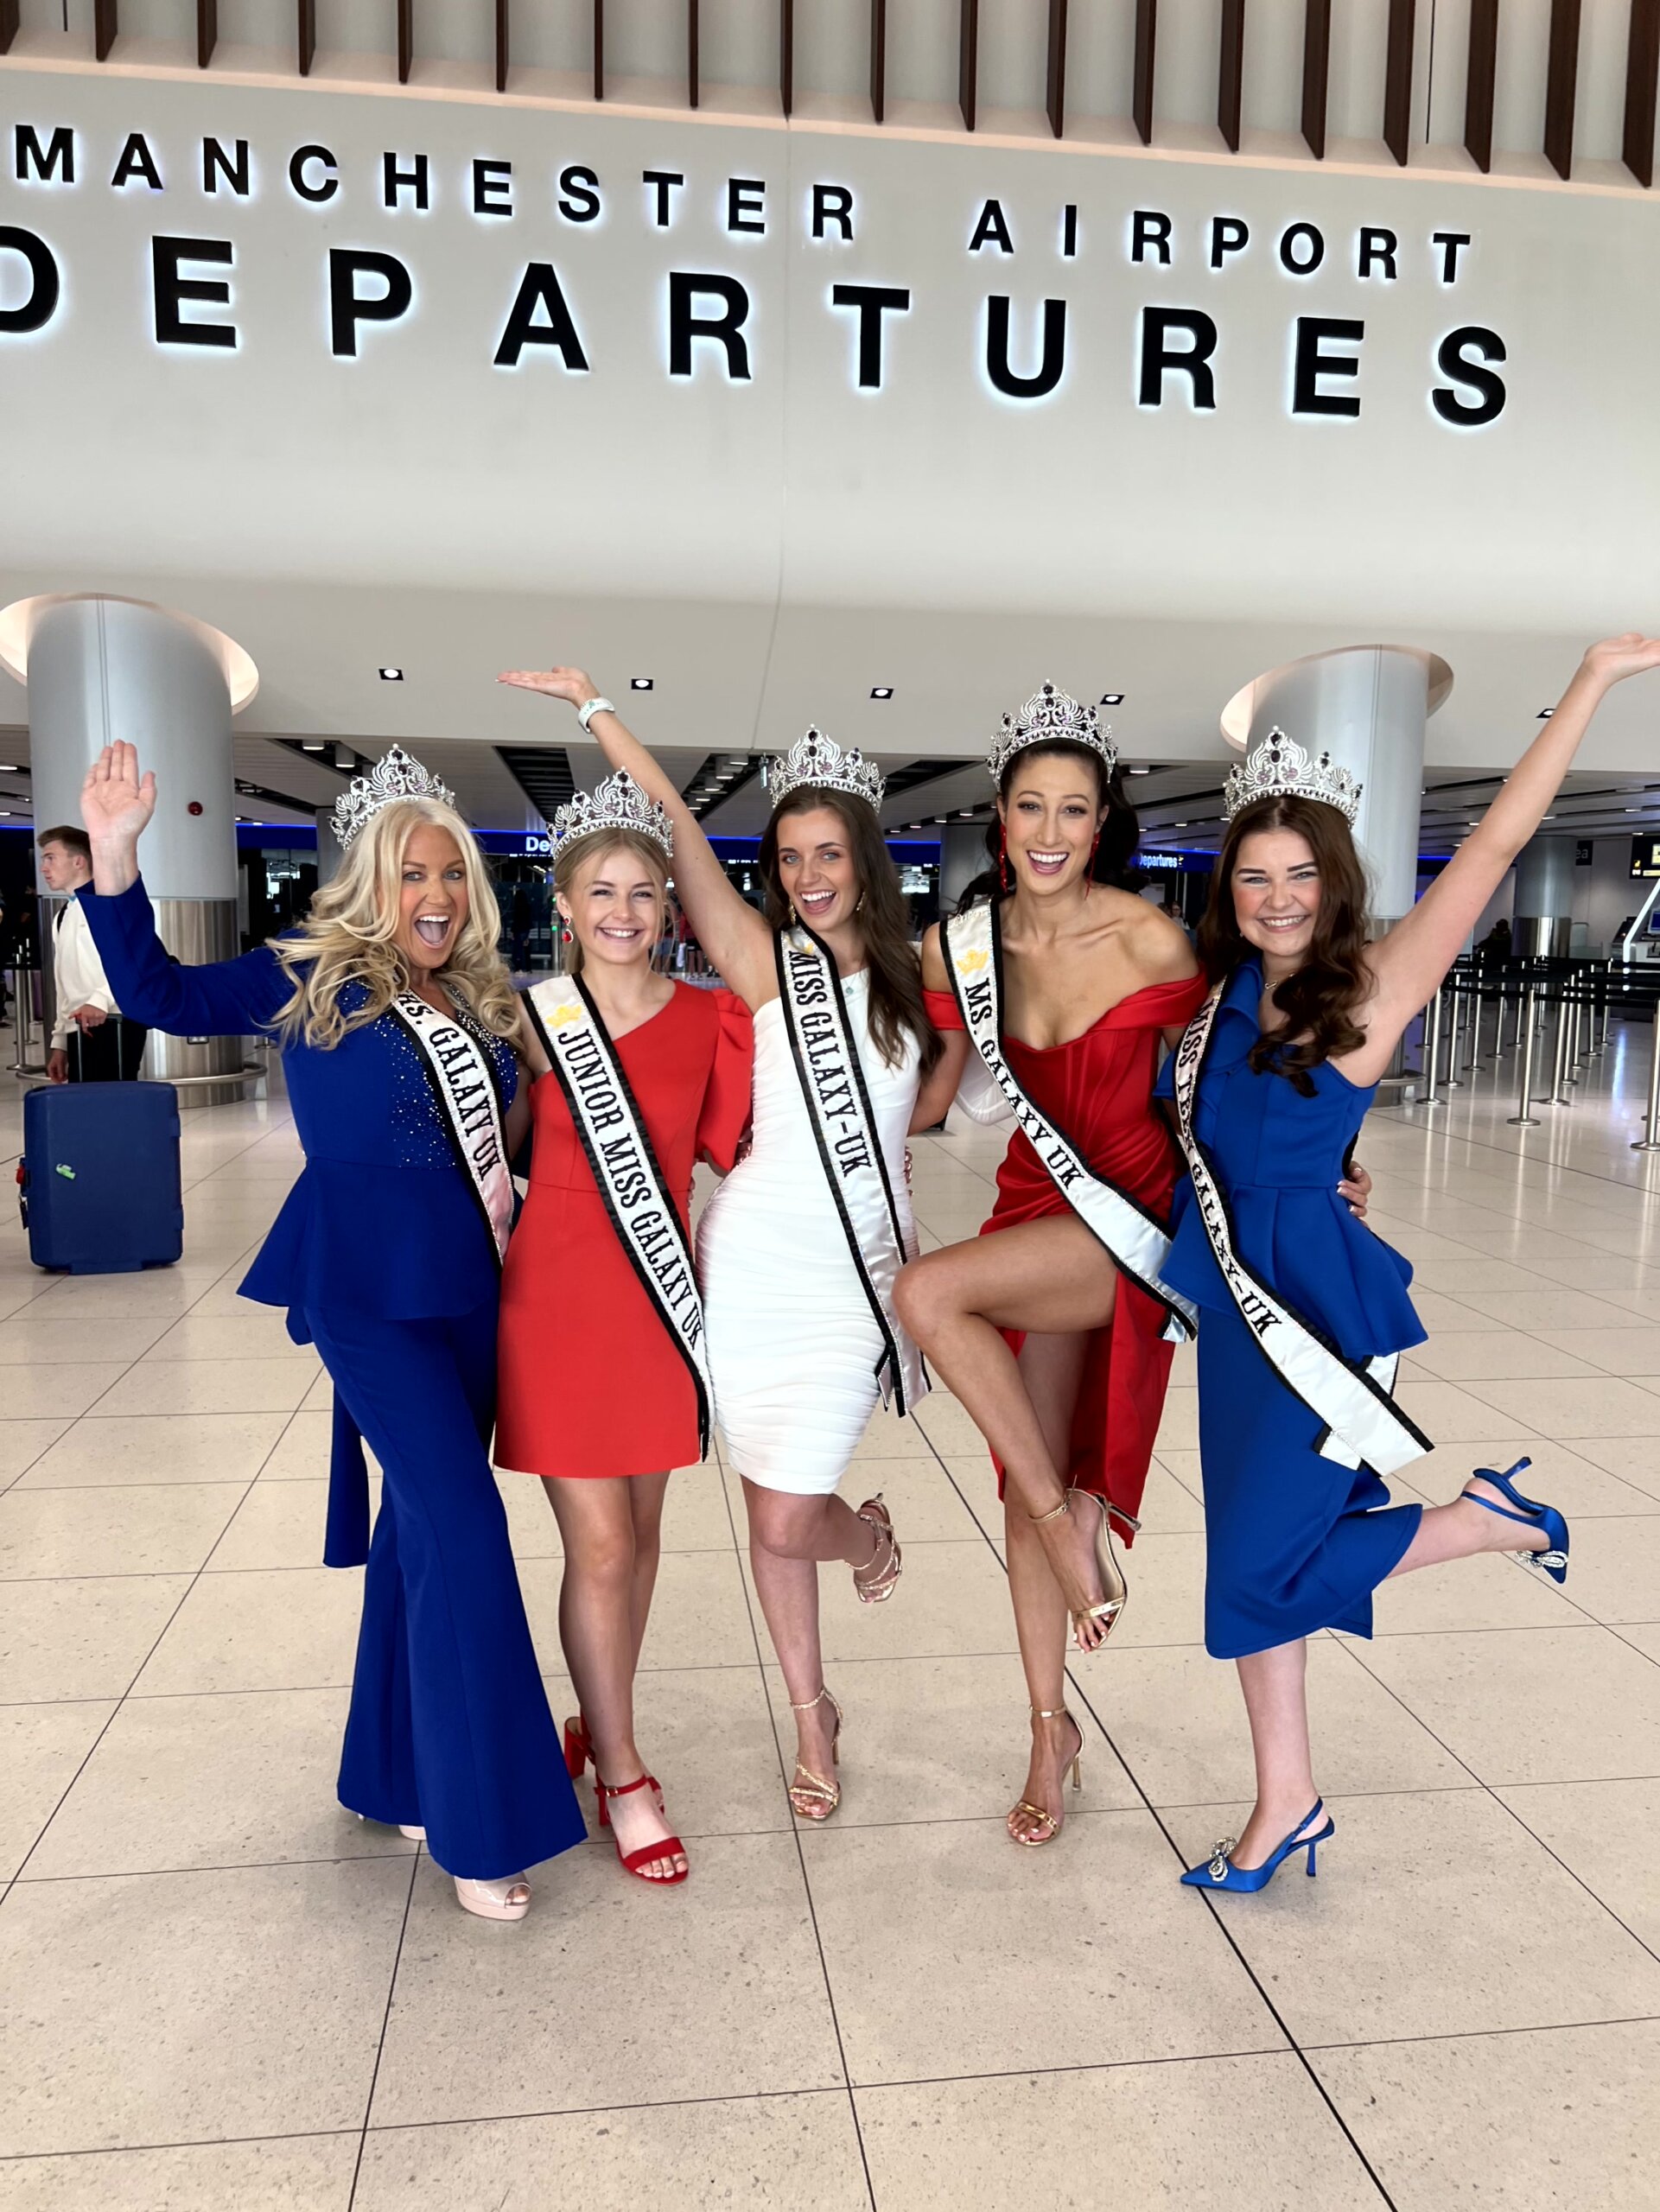 Touchdown in Florida! Team UK Have Arrived For The Galaxy International Pageants!